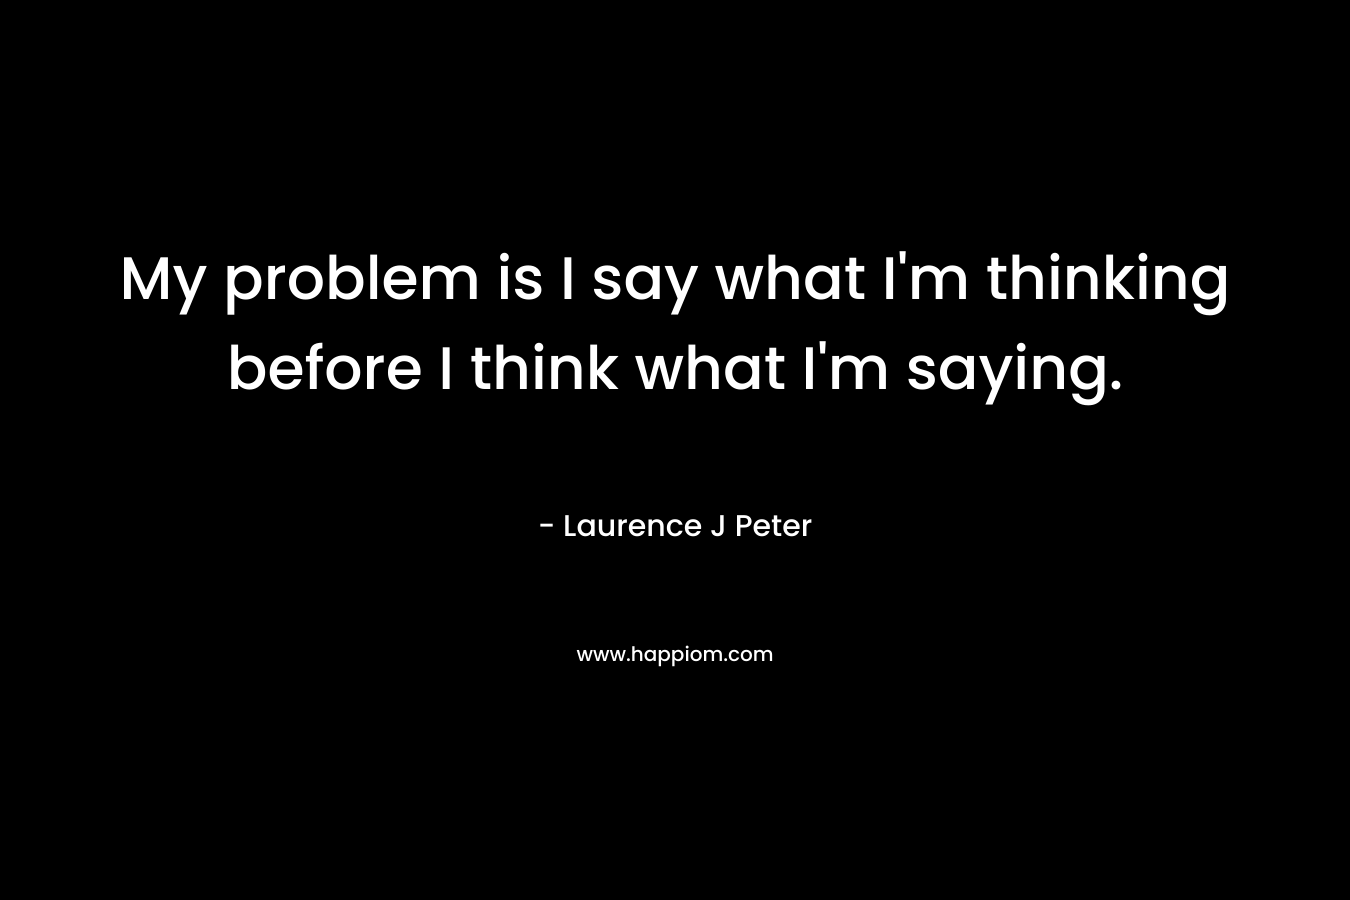 My problem is I say what I’m thinking before I think what I’m saying. – Laurence J Peter